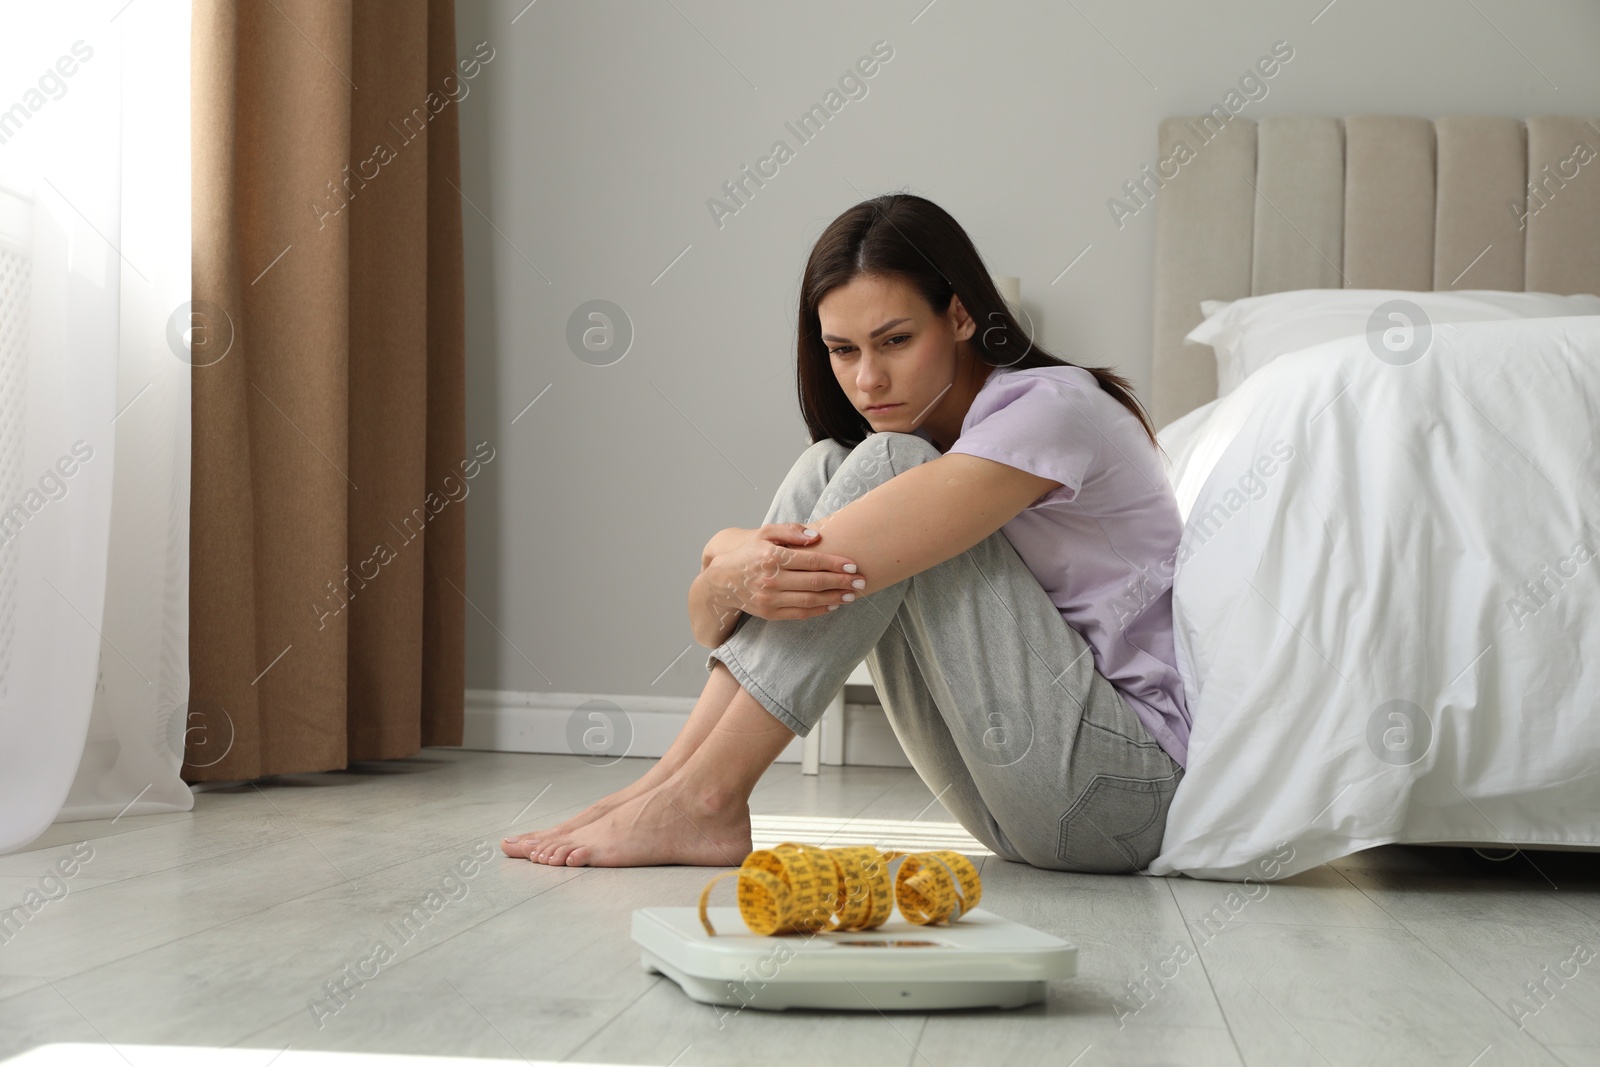 Photo of Eating disorder. Sad woman sitting near scale and measuring tape on floor indoors